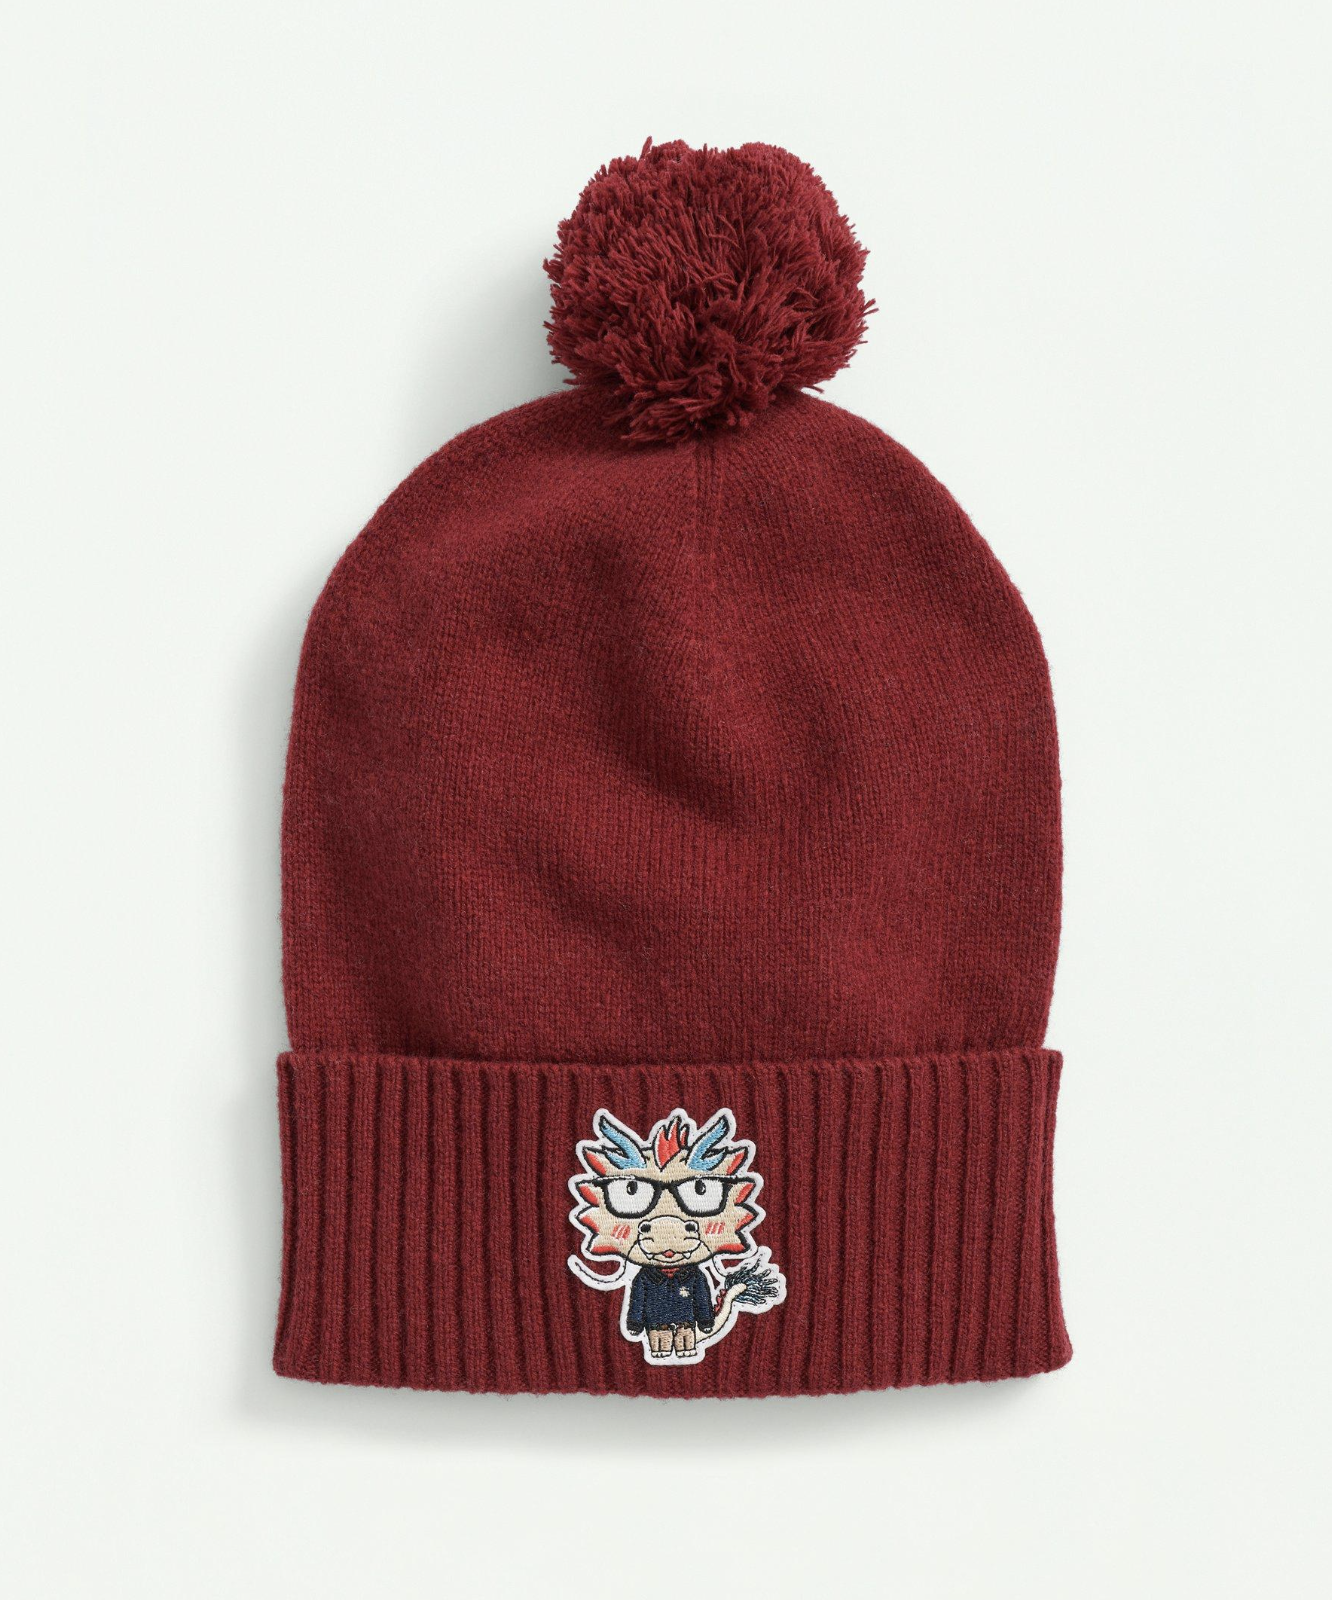 Red pom hat with dragon patch